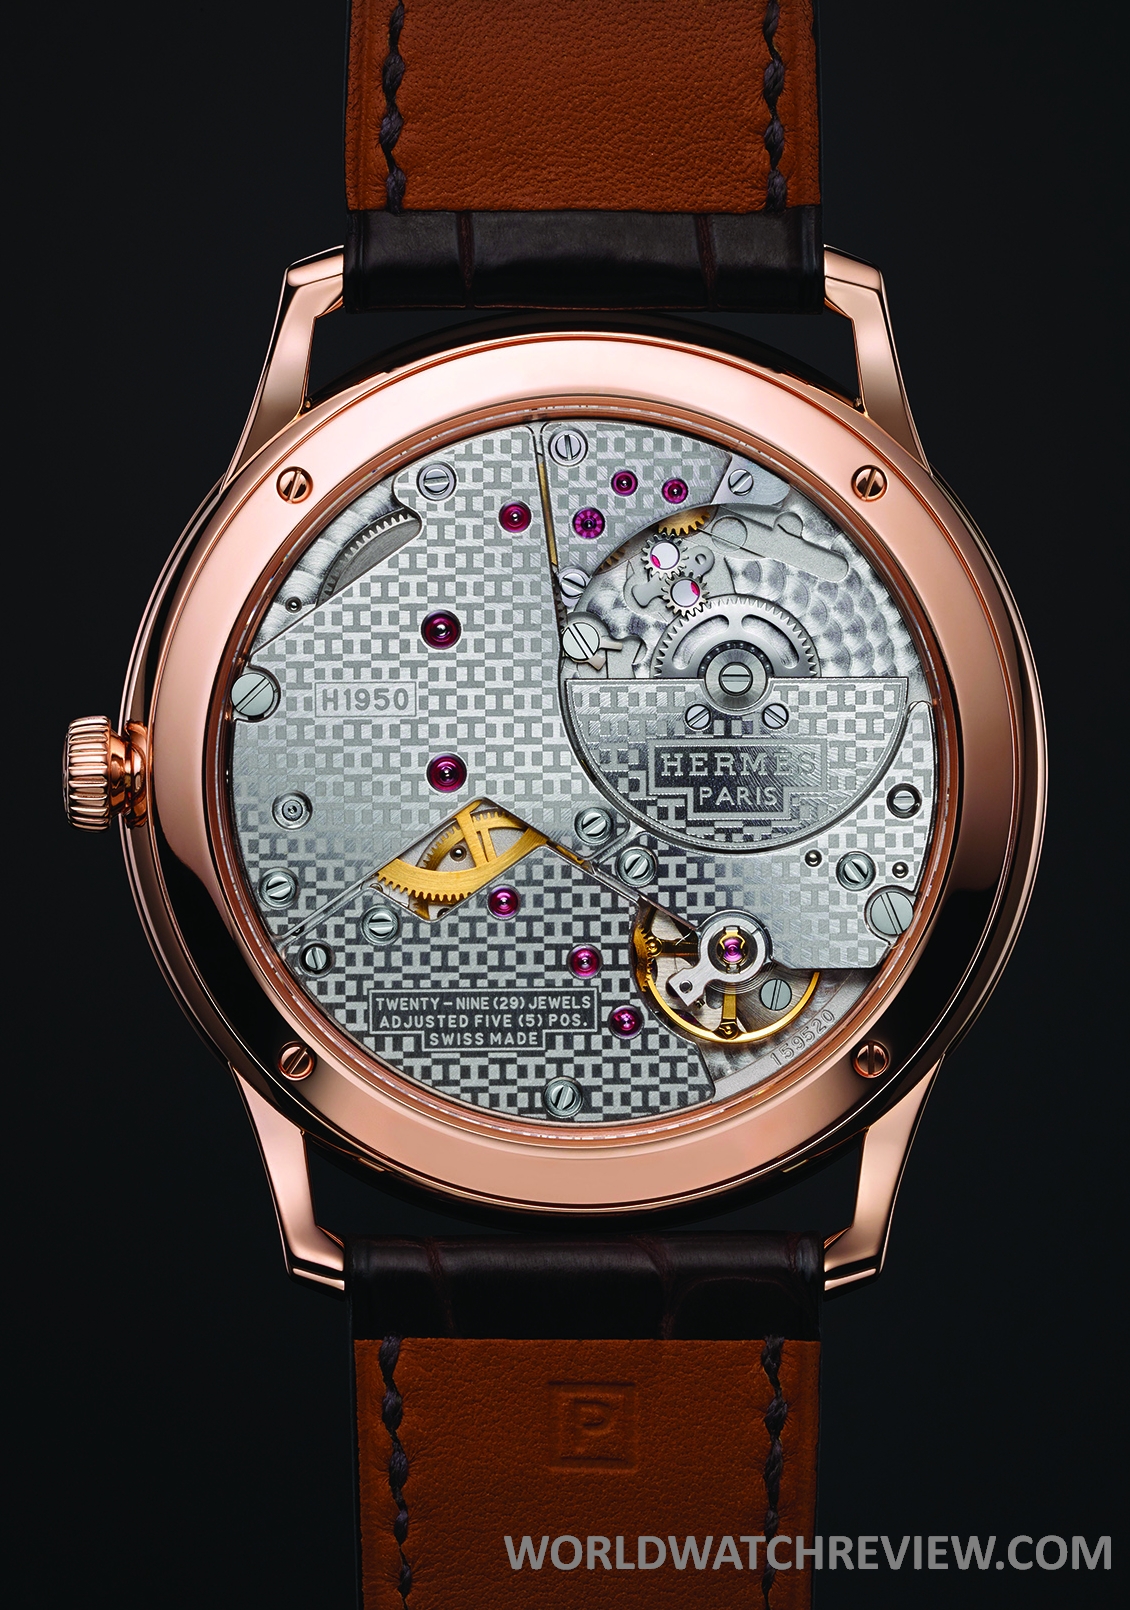 Slim d'Hermes Automatic in rose gold (sapphire back)